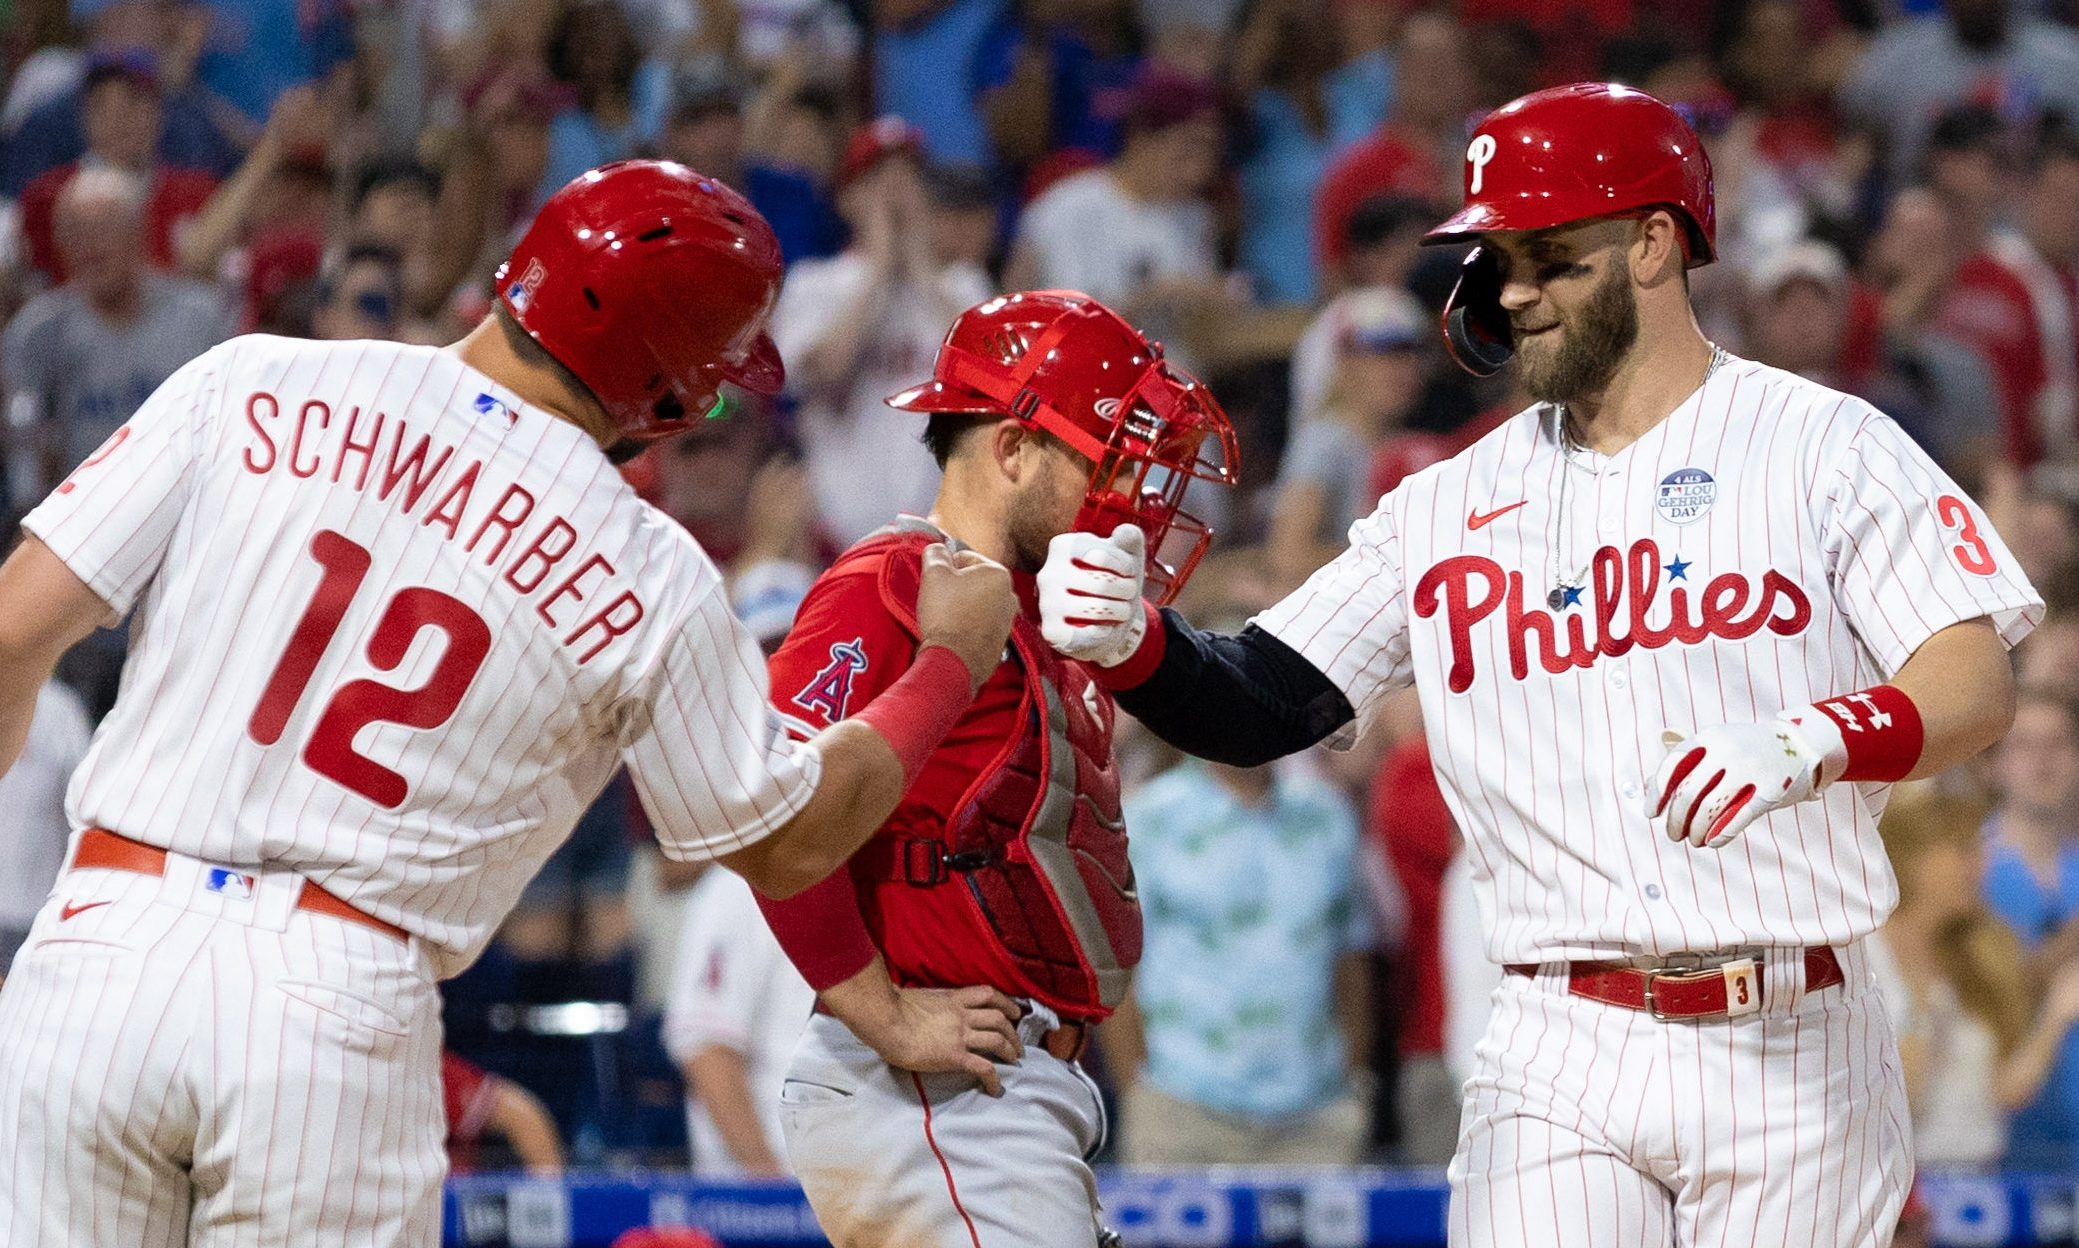 Photo: phillies odds to win today